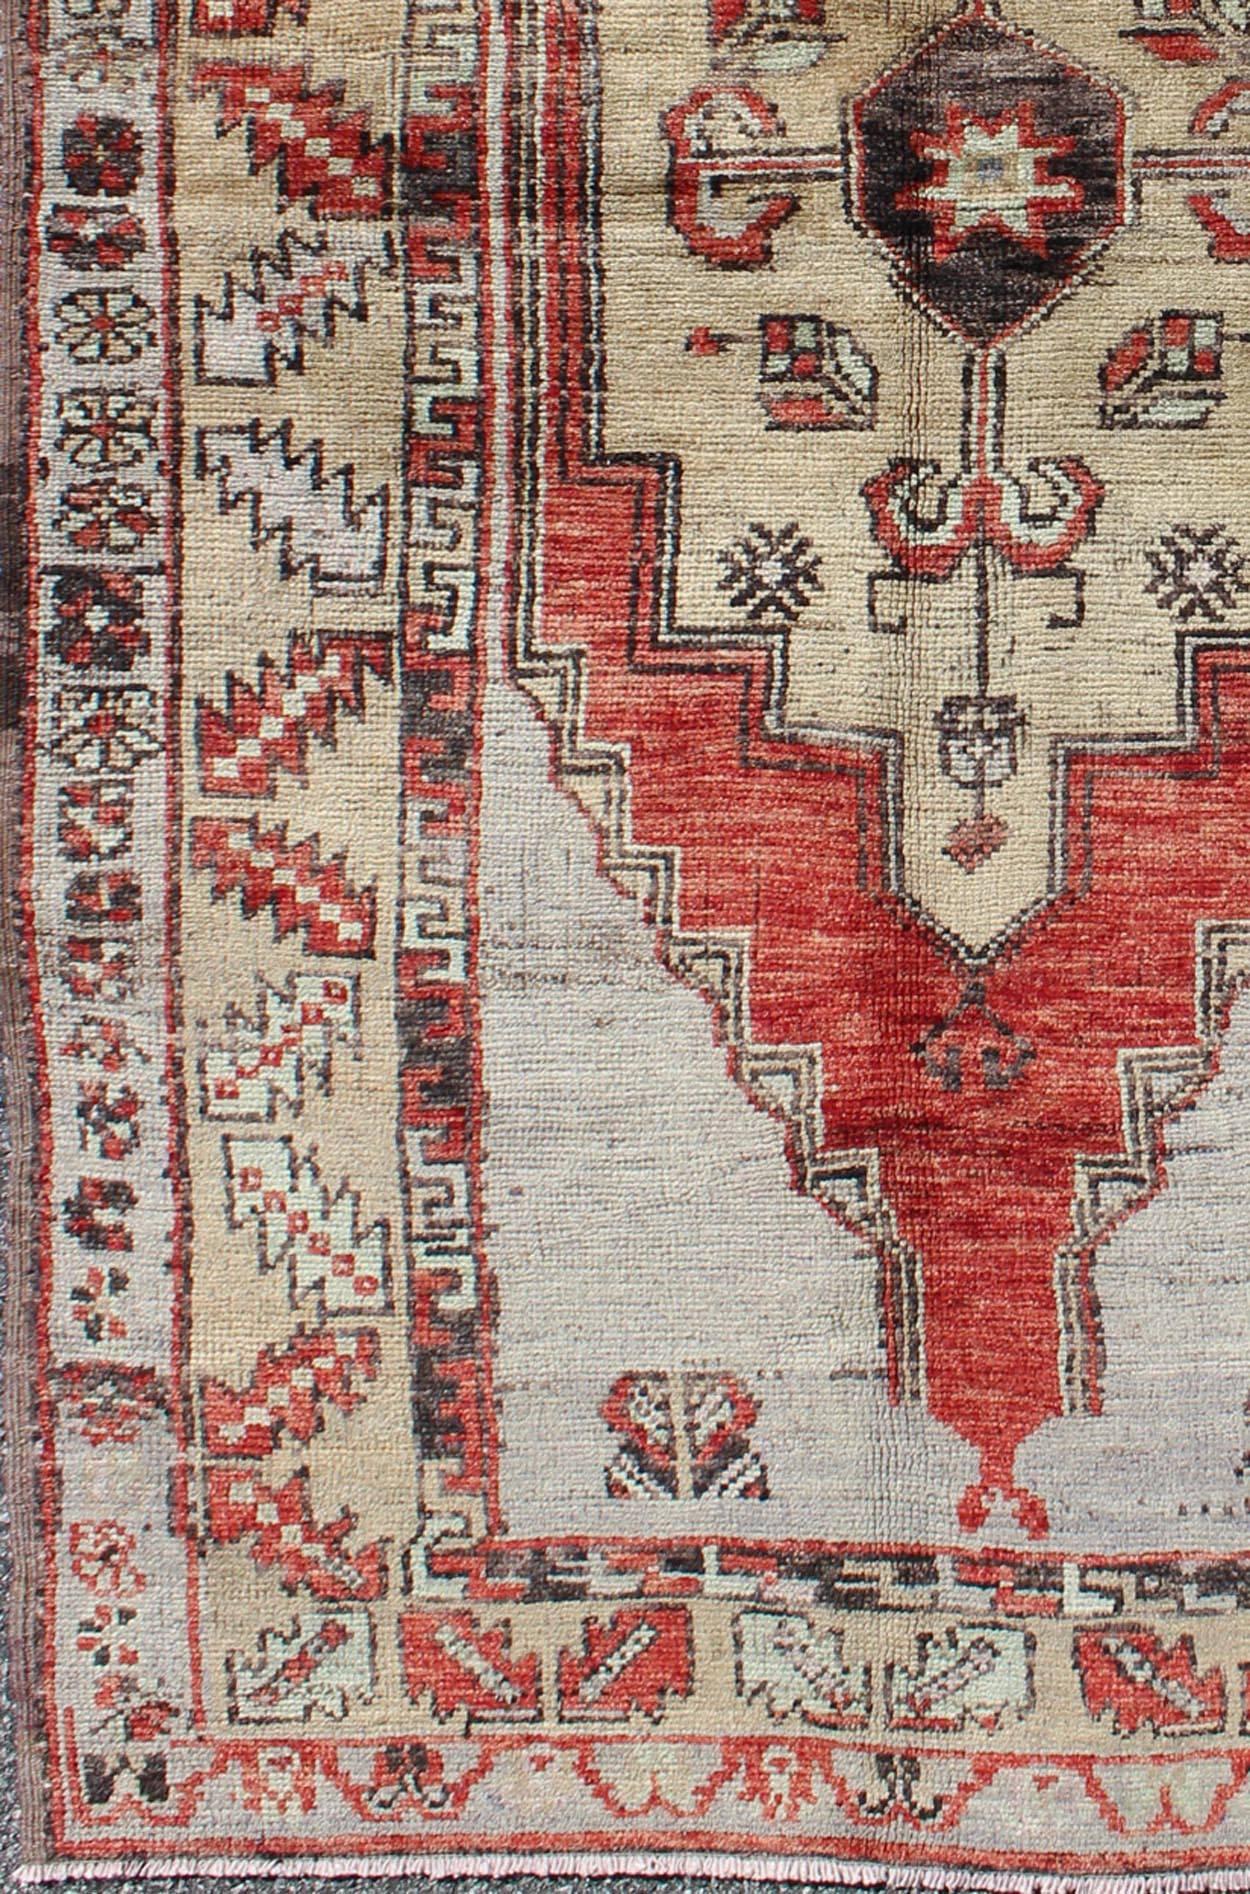  Vintage Turkish Oushak Rug in Orange Red, Butter & Light Gray. Vintage Turkish small Oushak Carpet with Geometric Medallion in soft orange Red and multi colors, Small Oushak rug, Keivan Woven Arts #rug/EN-140233, origin/turkey, Hand knotted wool